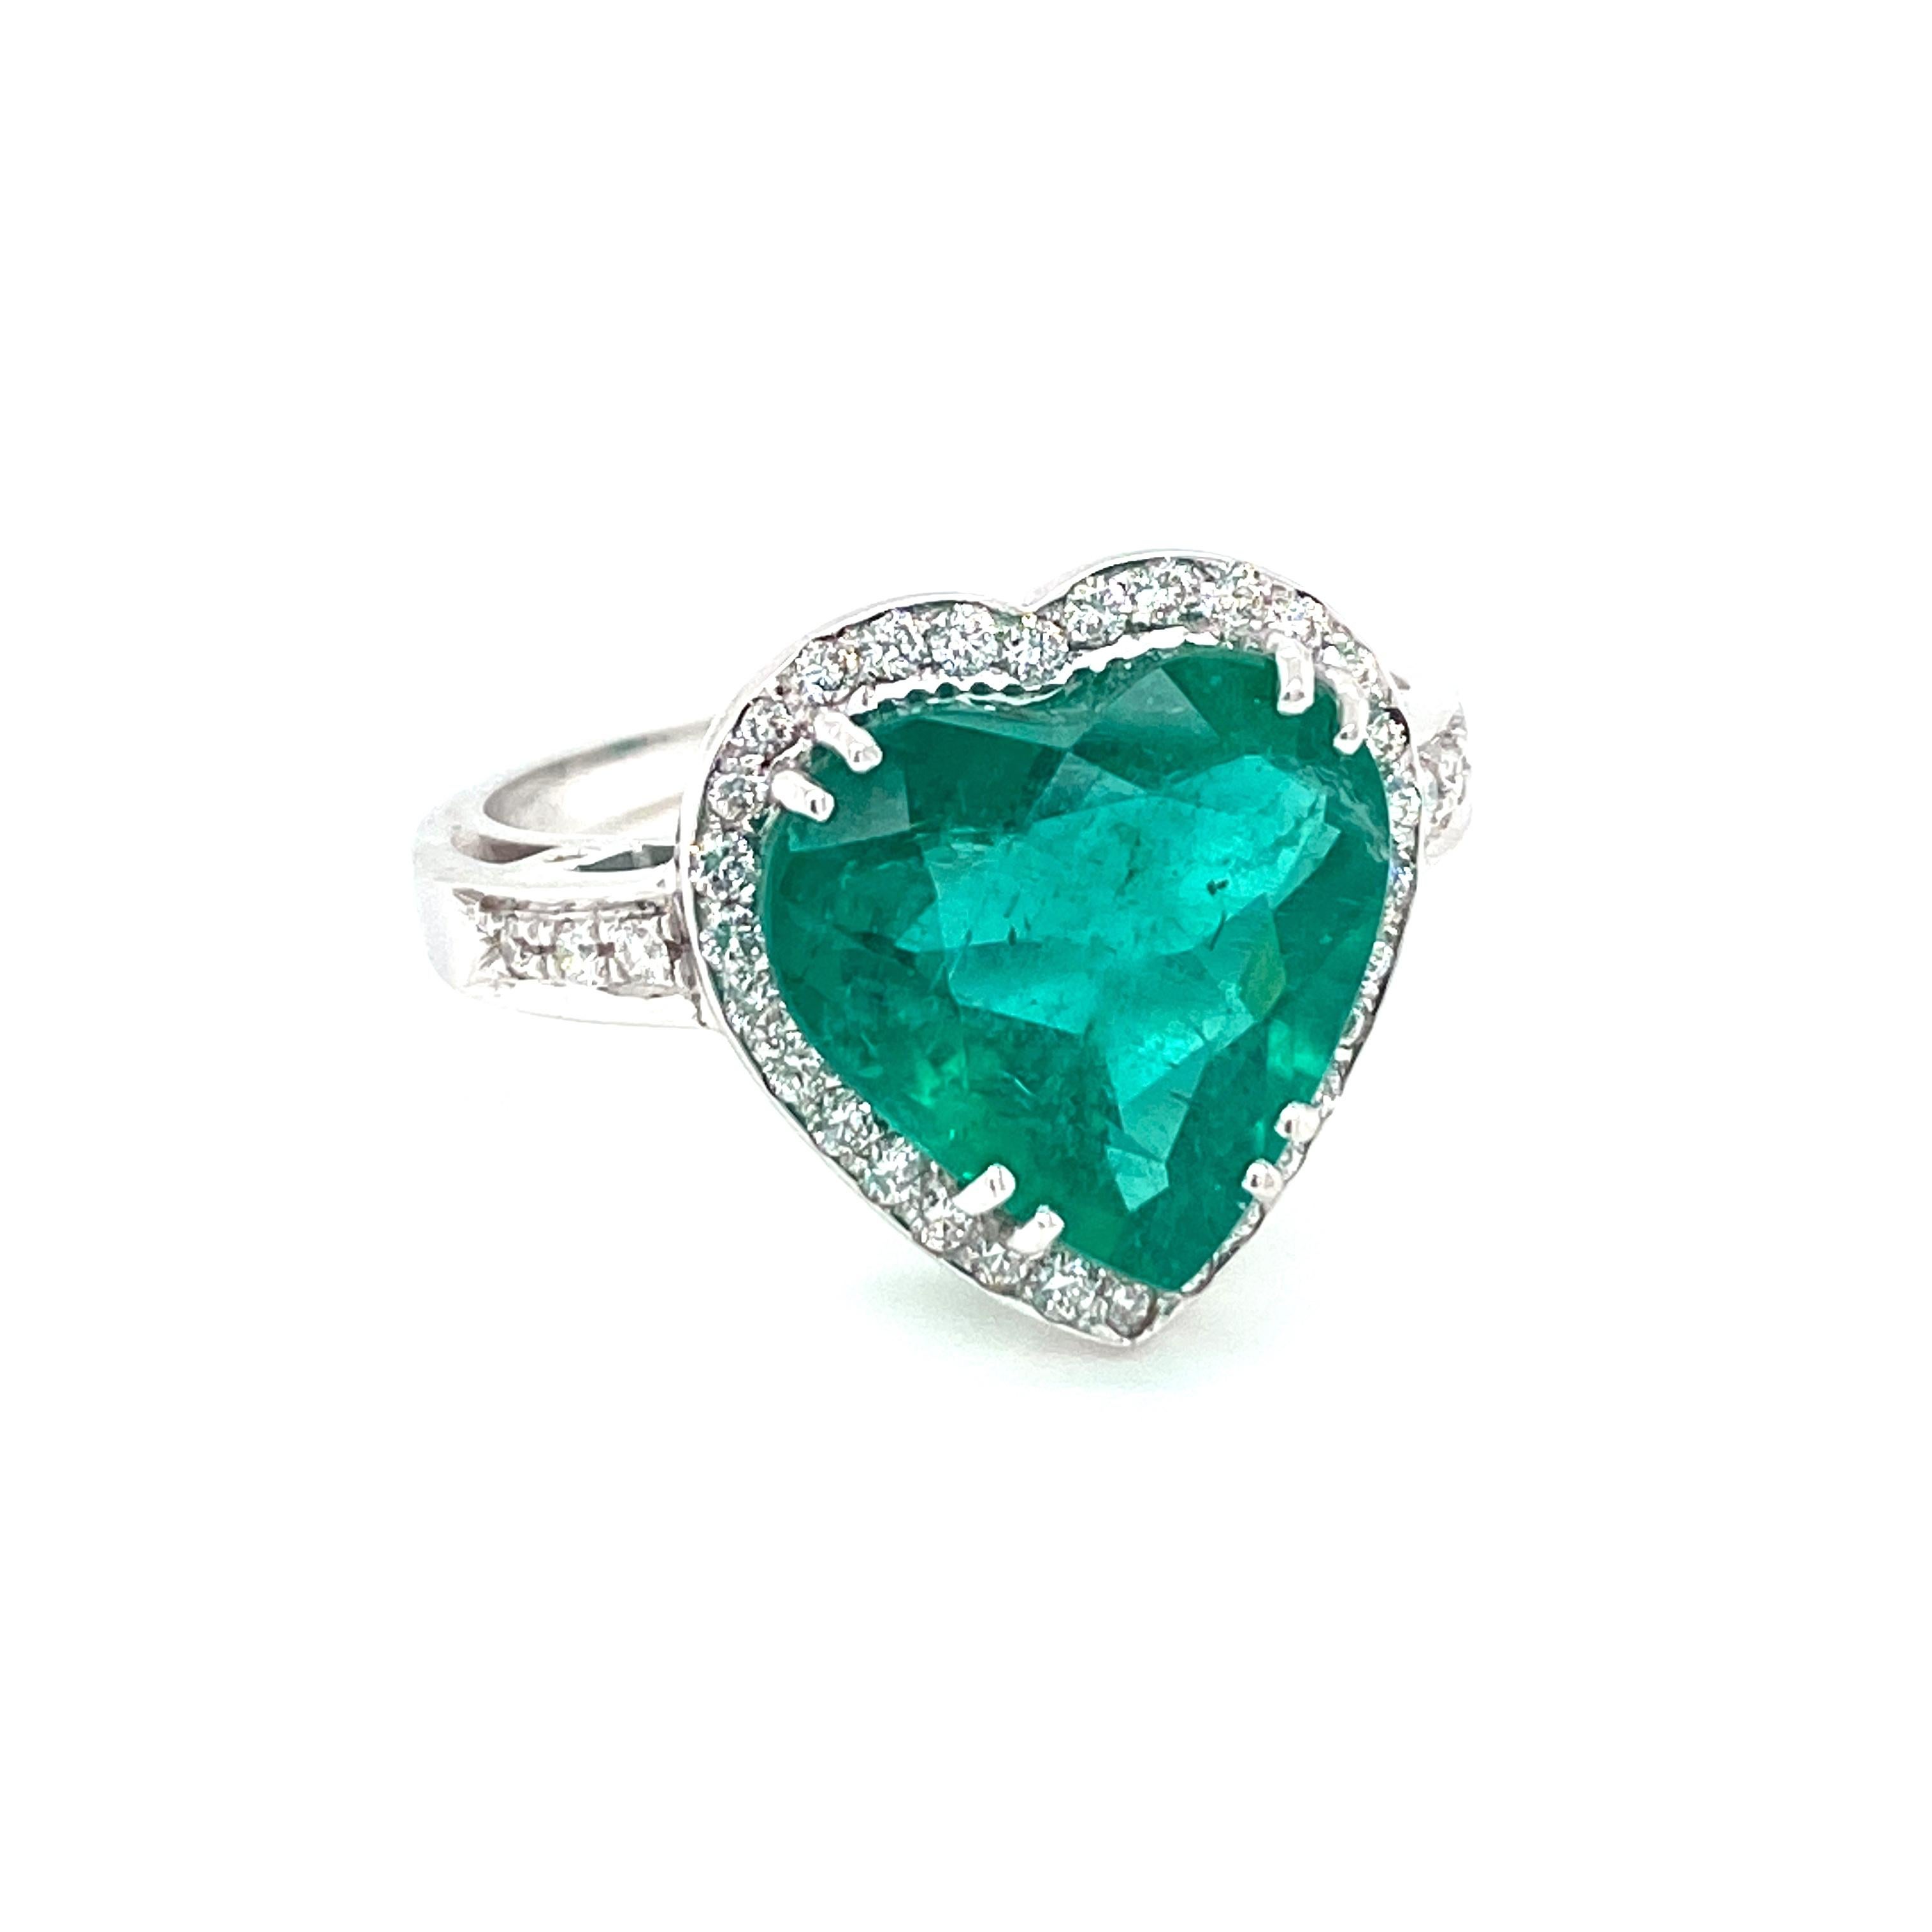 Beautiful 18k white gold ring set with a vivid heart shaped Emerald weighing 5,51 carats, adorned by sparkling round brilliant cut diamonds weighing .40 ct  G color VVS1.

CONDITION: Excellent
METAL: 18k white Gold
GEM STONE: Emerald 5,51 ct -